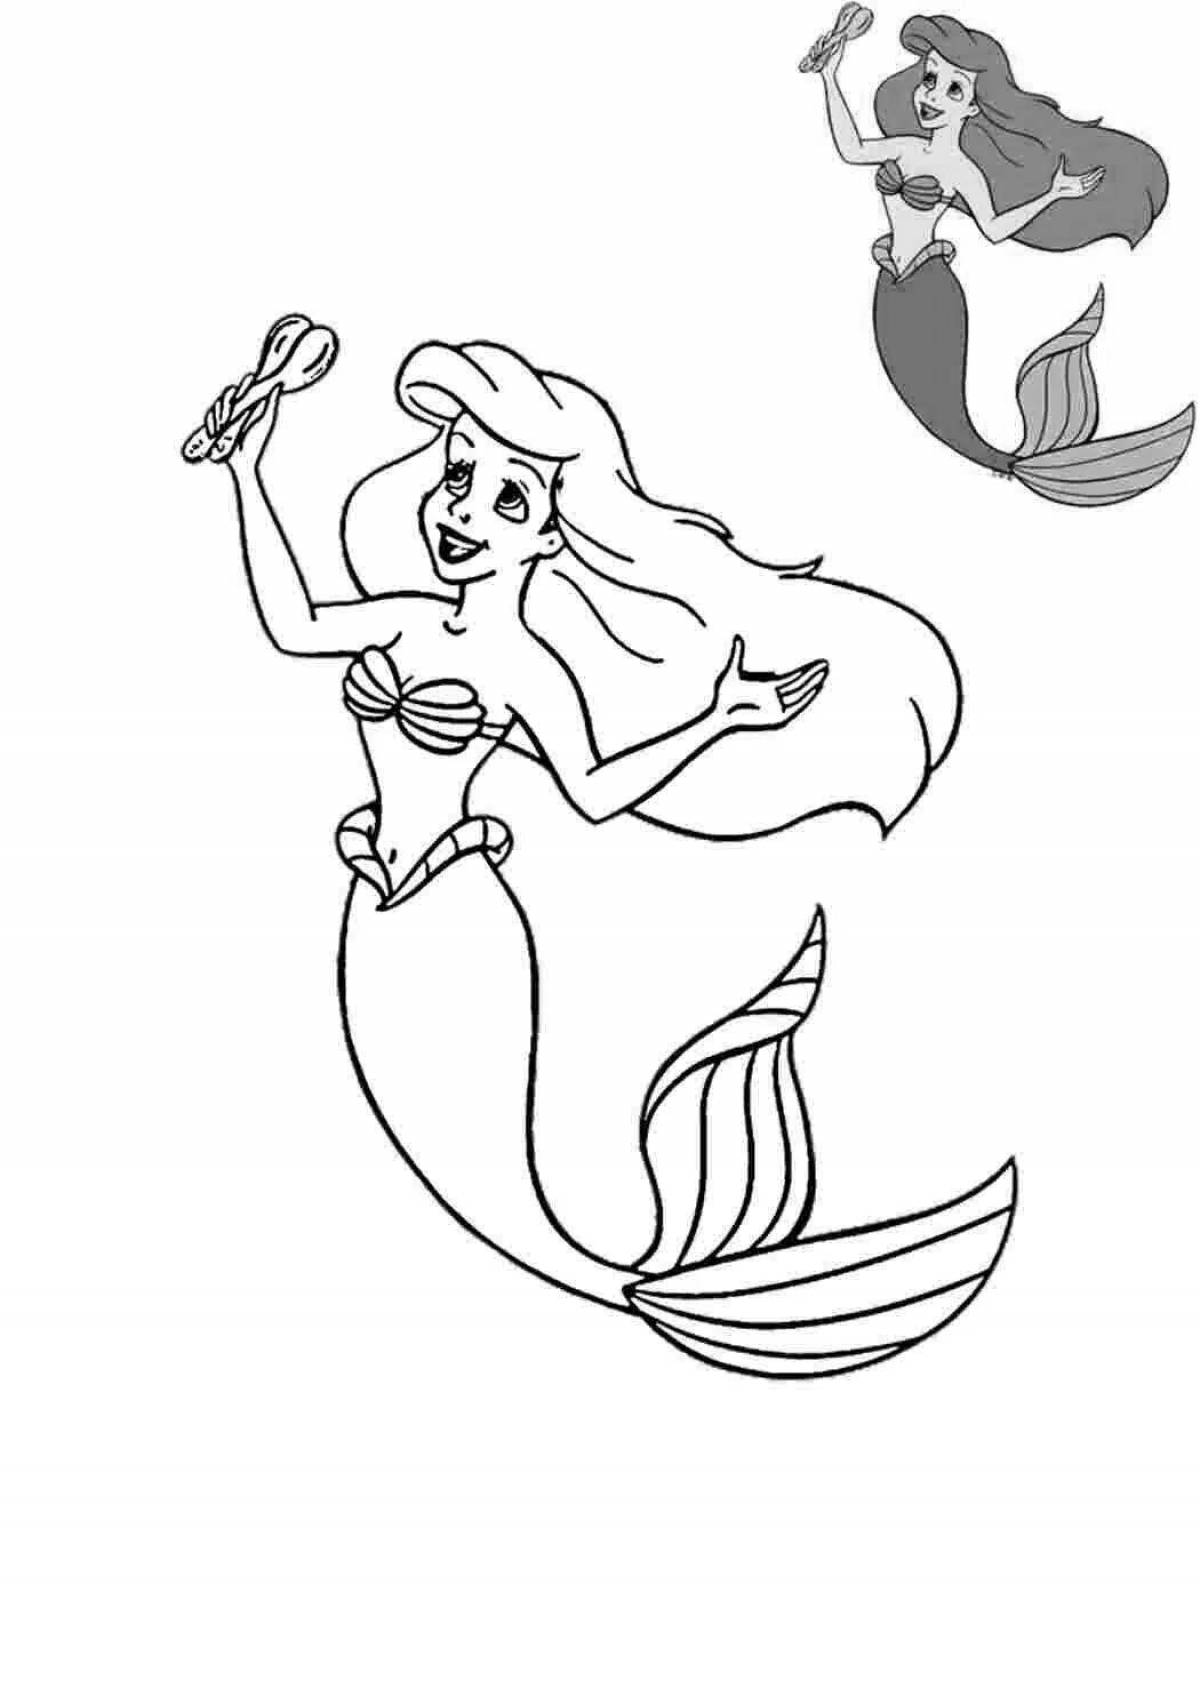 Fabulous ariel coloring book with legs